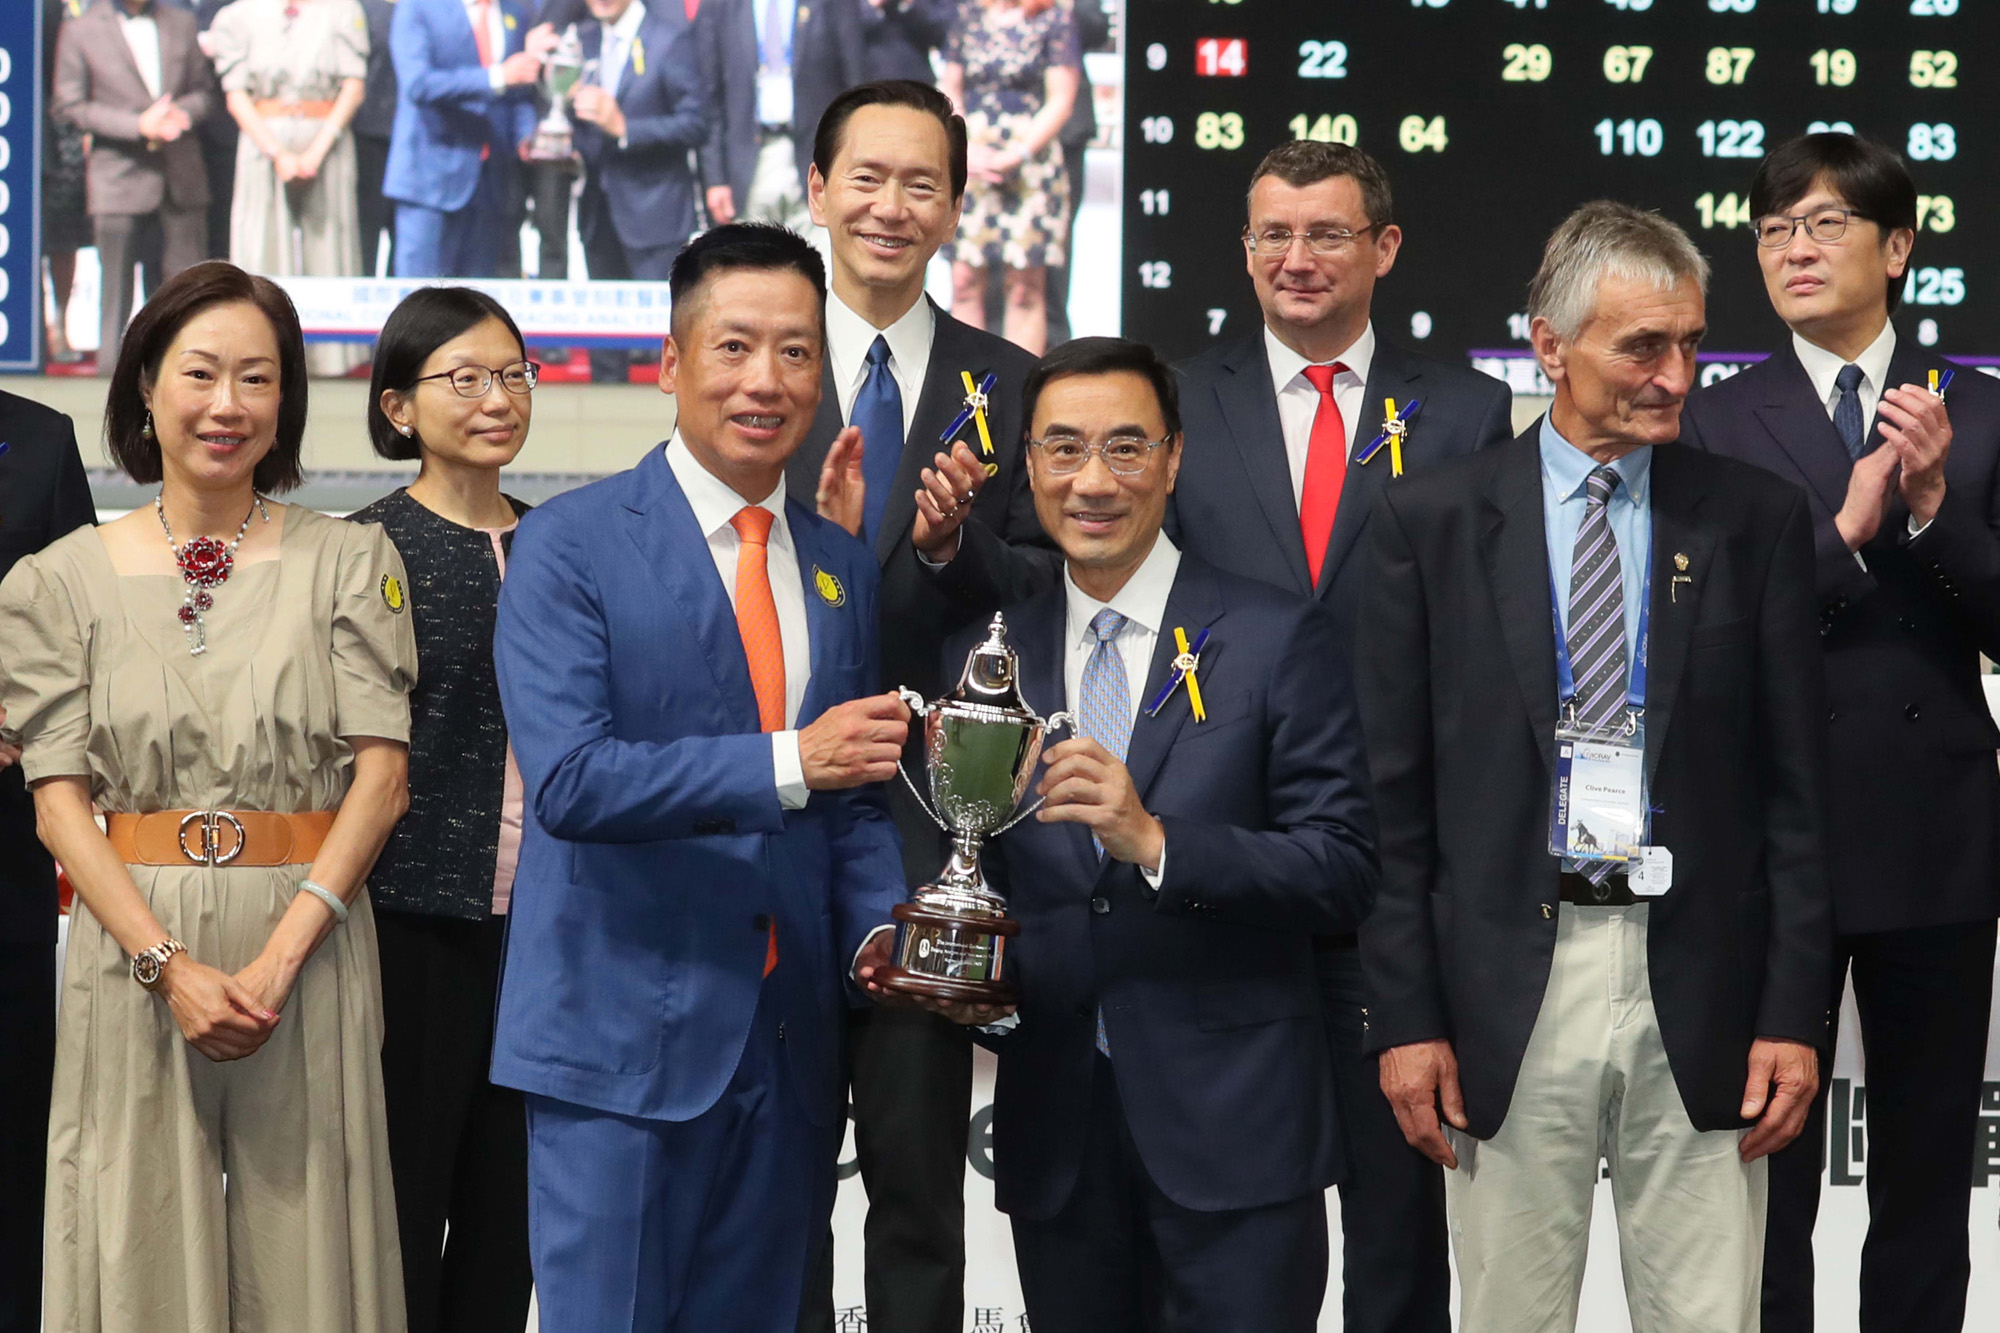 Mr Michael Lee (right), Chairman of The Hong Kong Jockey Club, presents the International Conference Of Racing Analysts And Veterinarians Cup to Mr. Eden Wong Chi Hong, Owner of Street Conqueror.